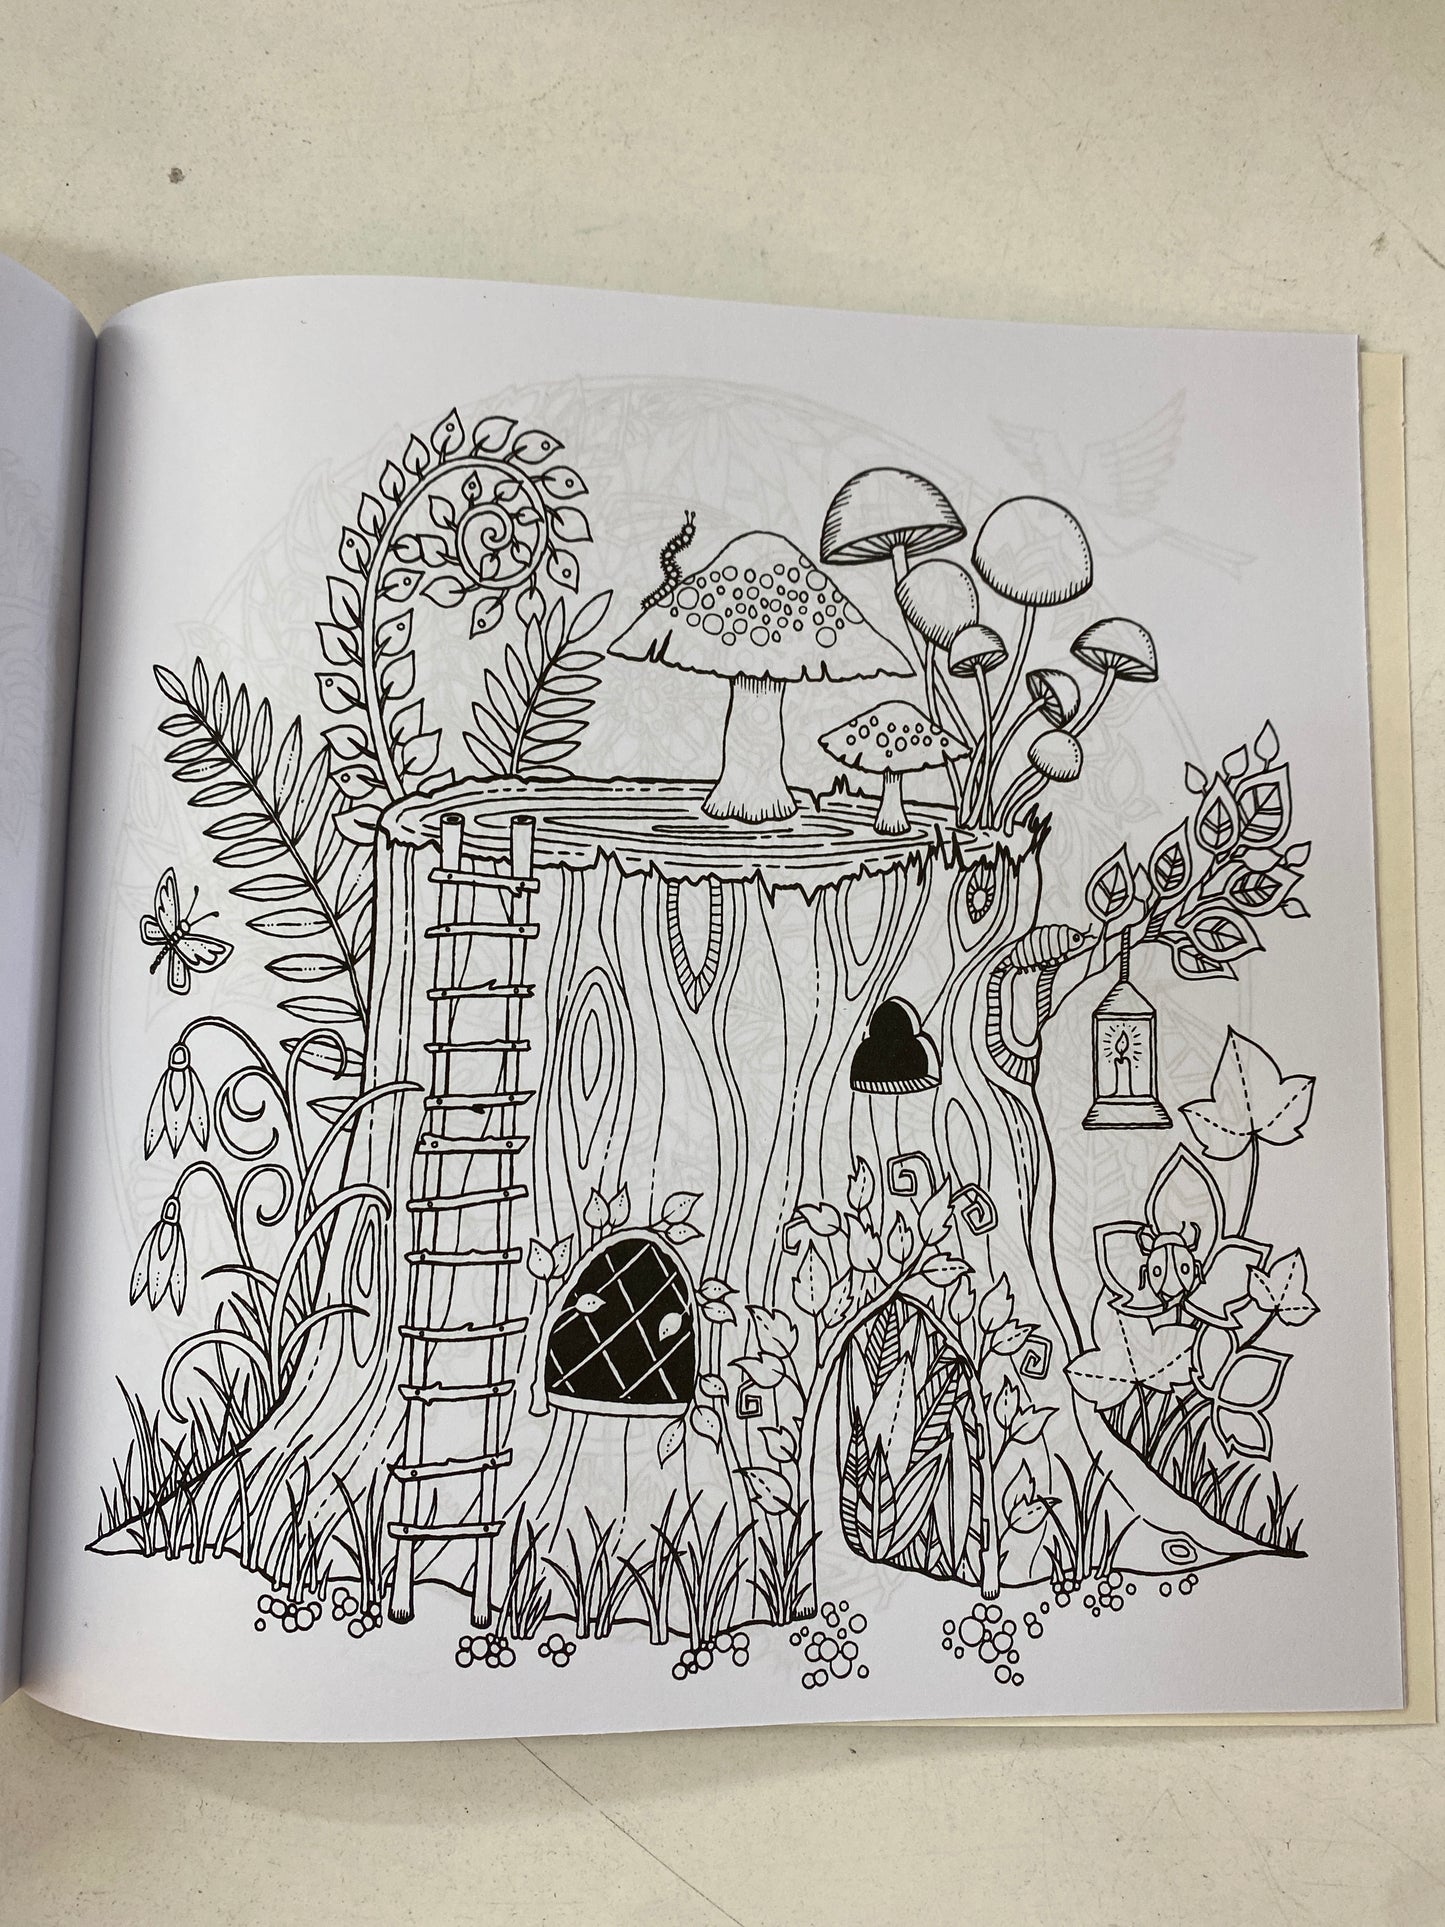 Enchanted forest colouring Book